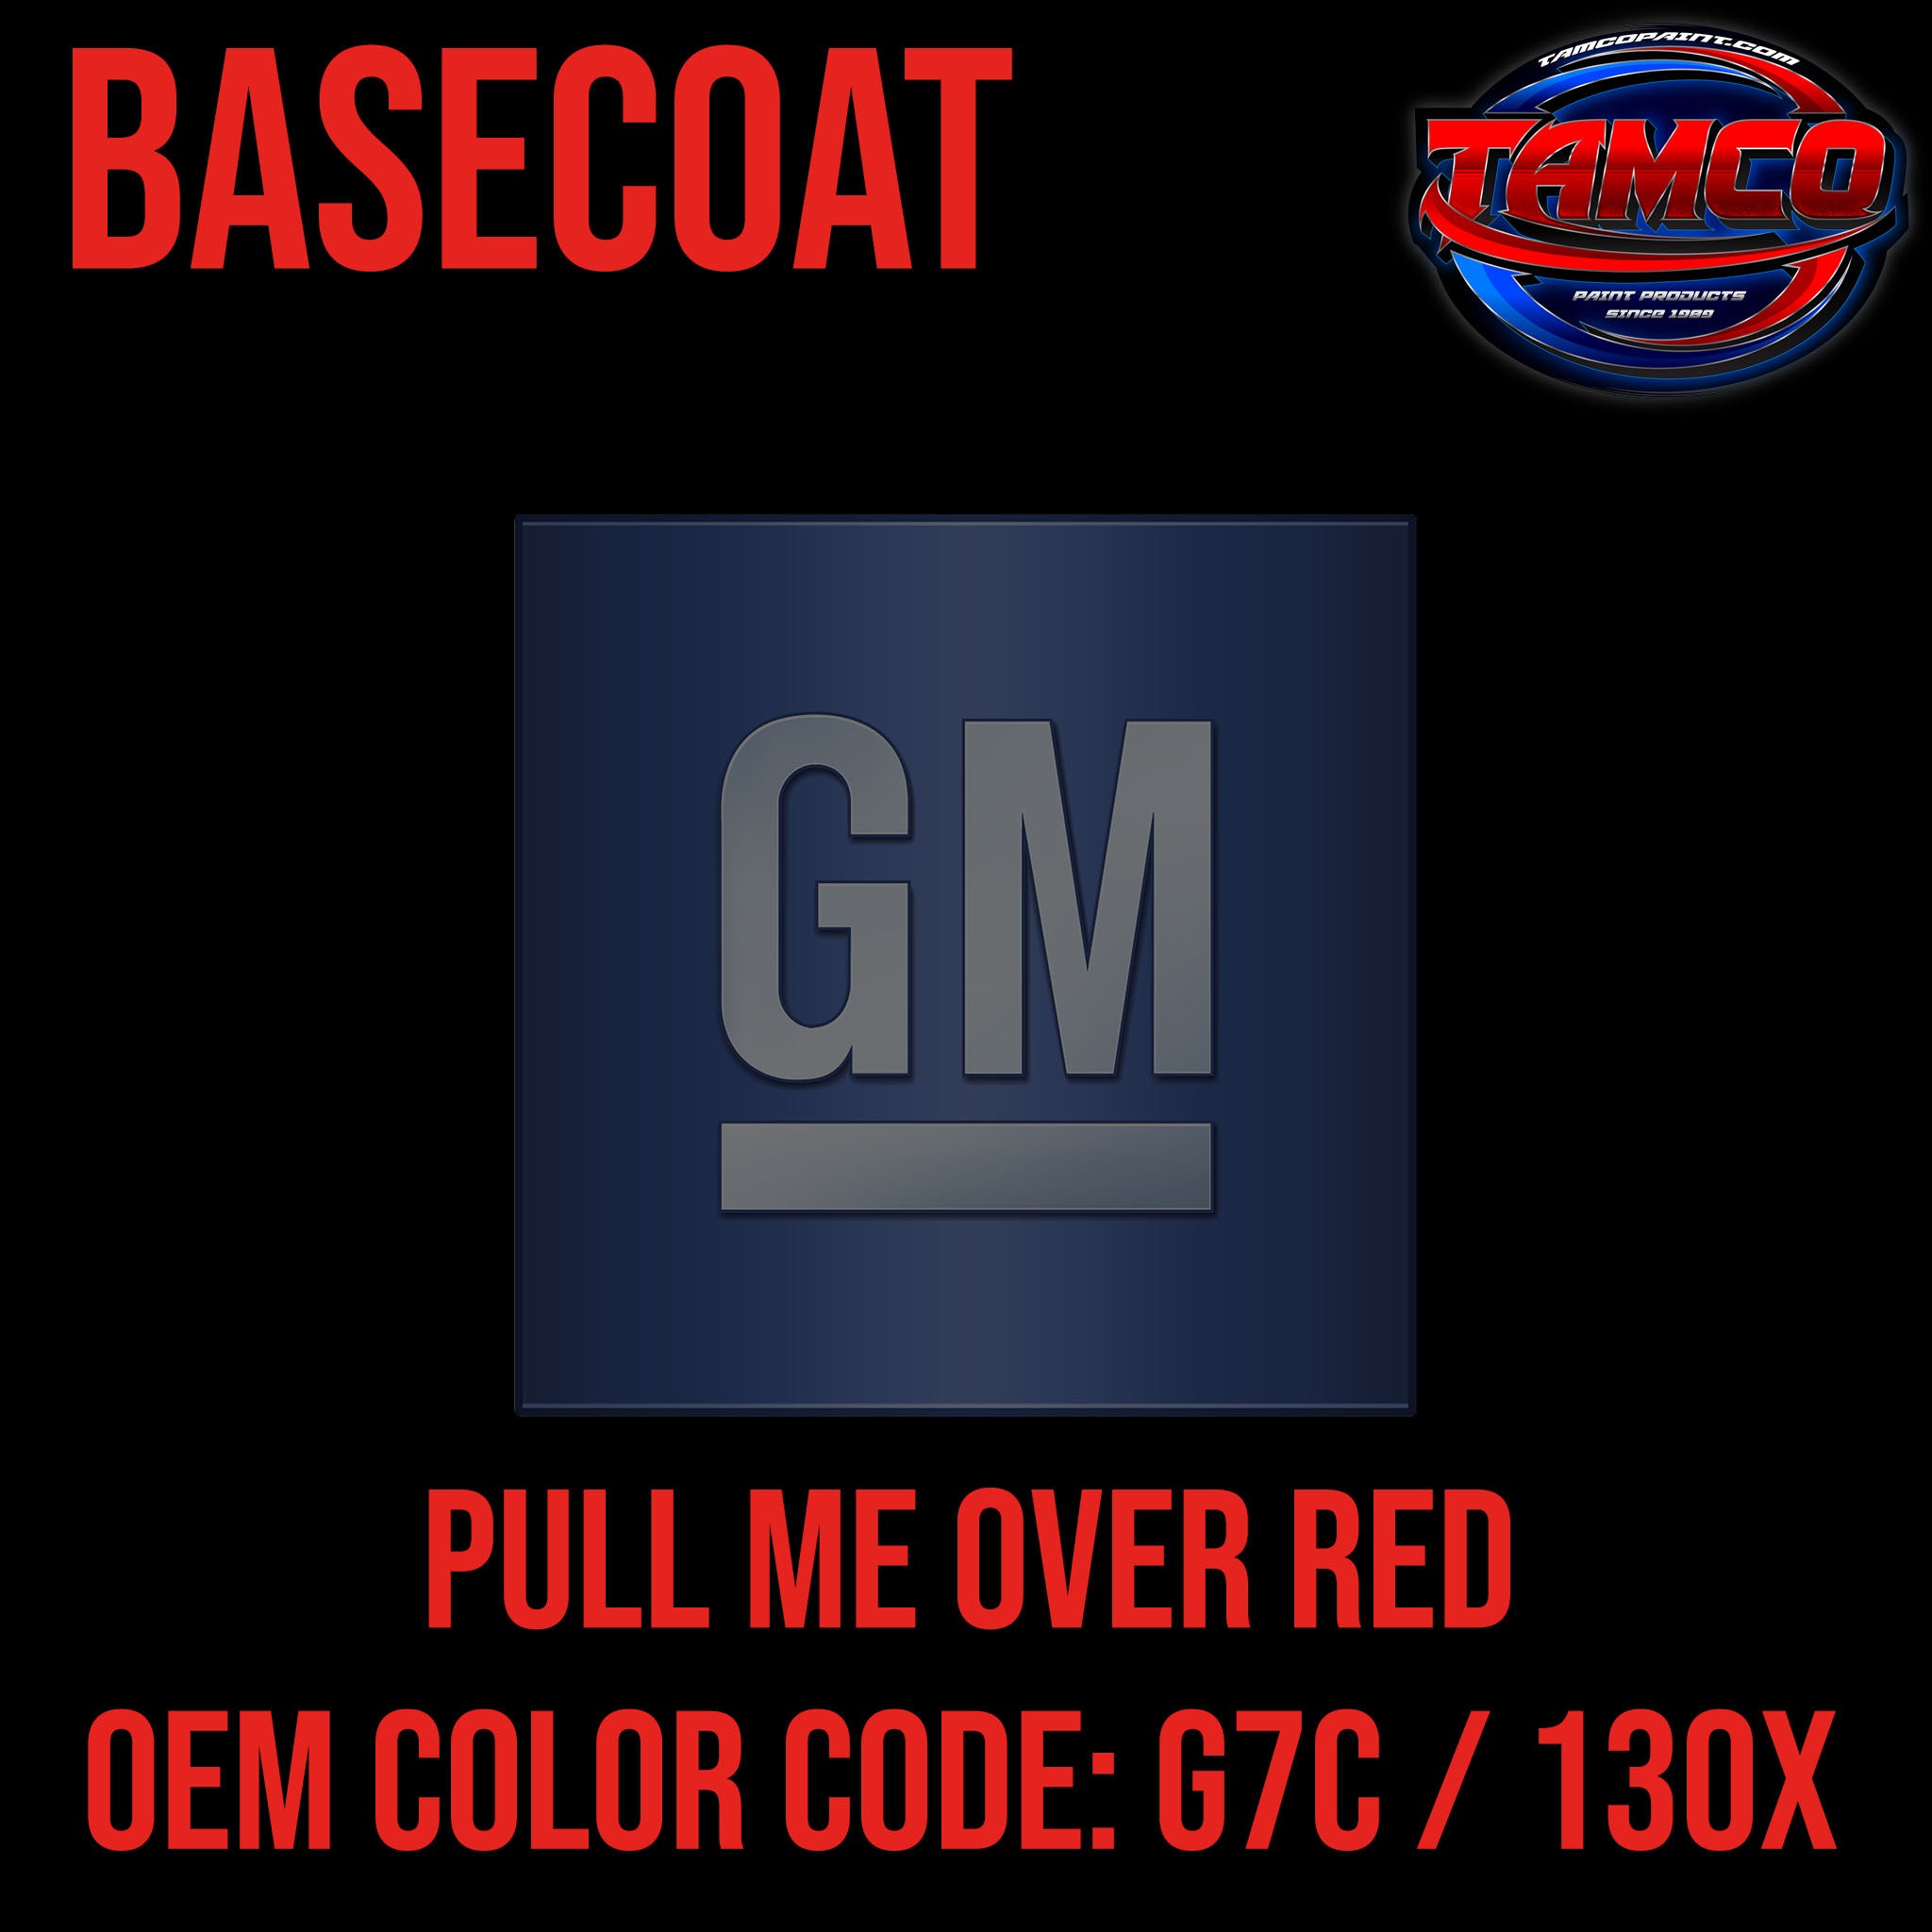 GM Pull Me Over Red | G7C / 130X | 2014-2023 | OEM Basecoat